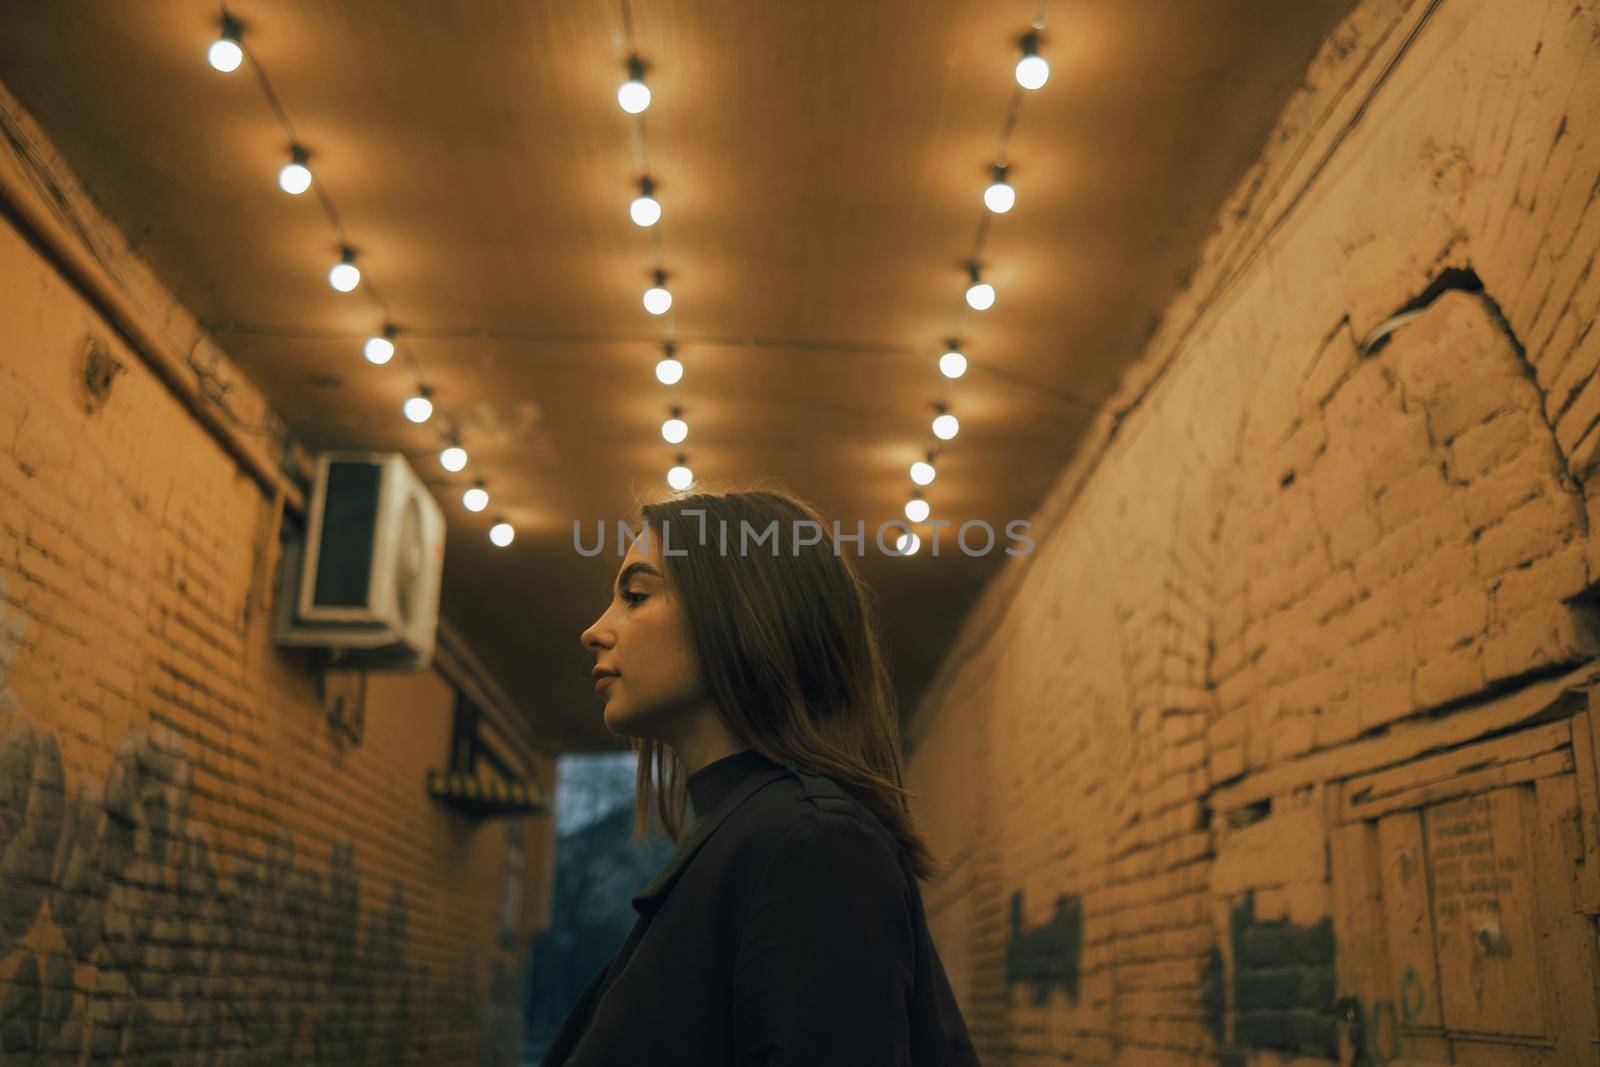 portrait of a woman in a lantern-lit alley late in the evening